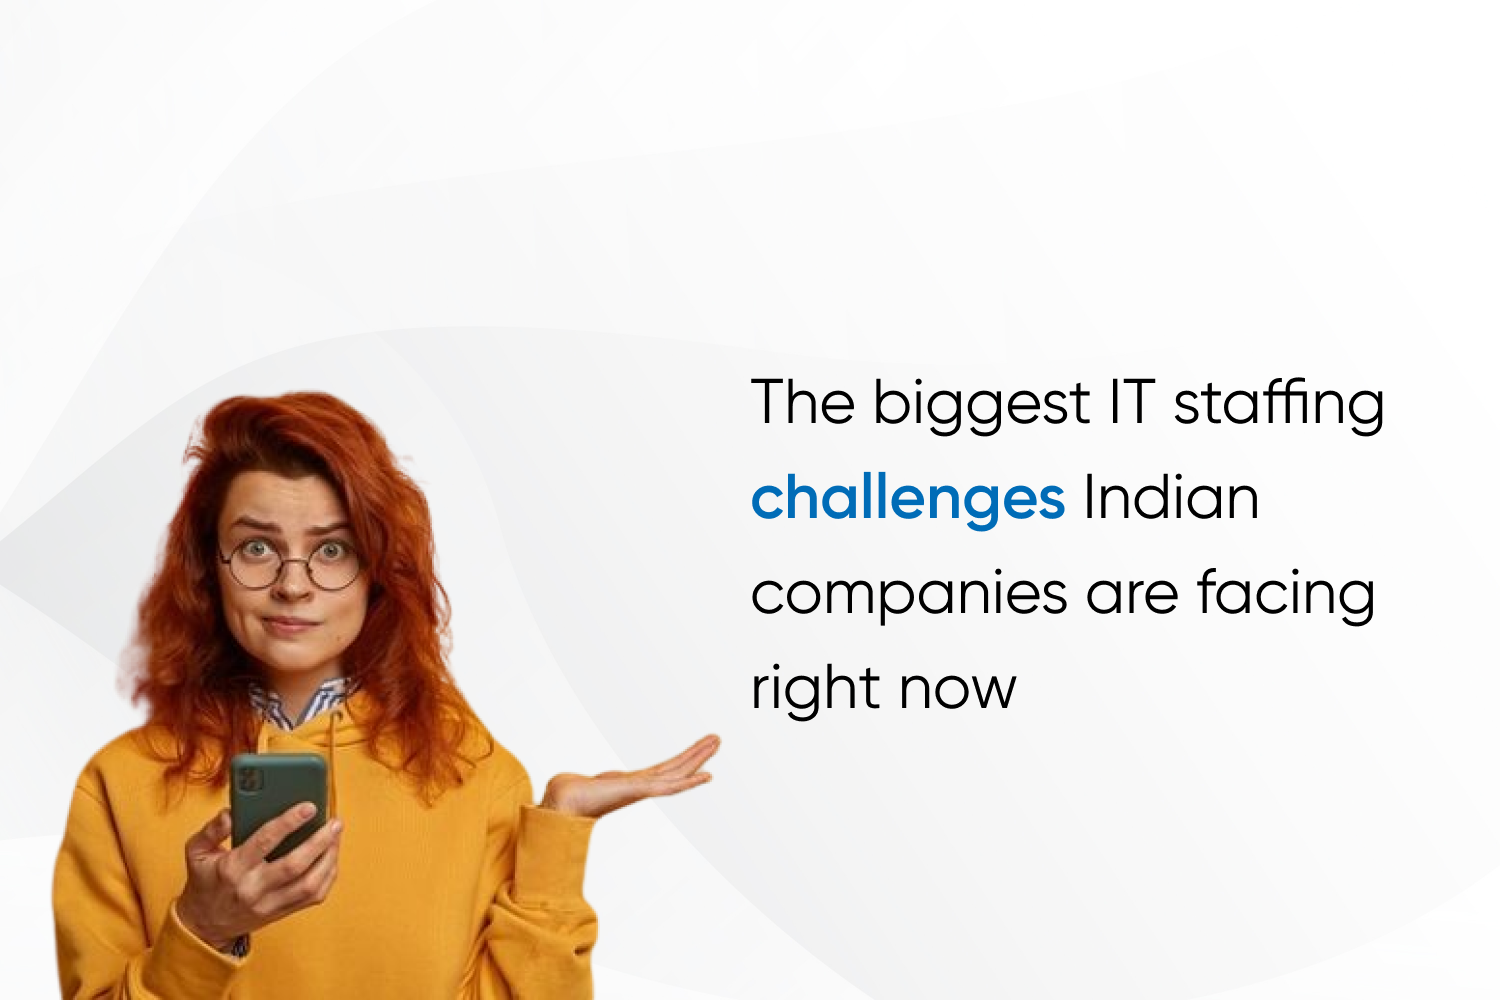 The biggest IT staffing challenges Indian companies are facing right now